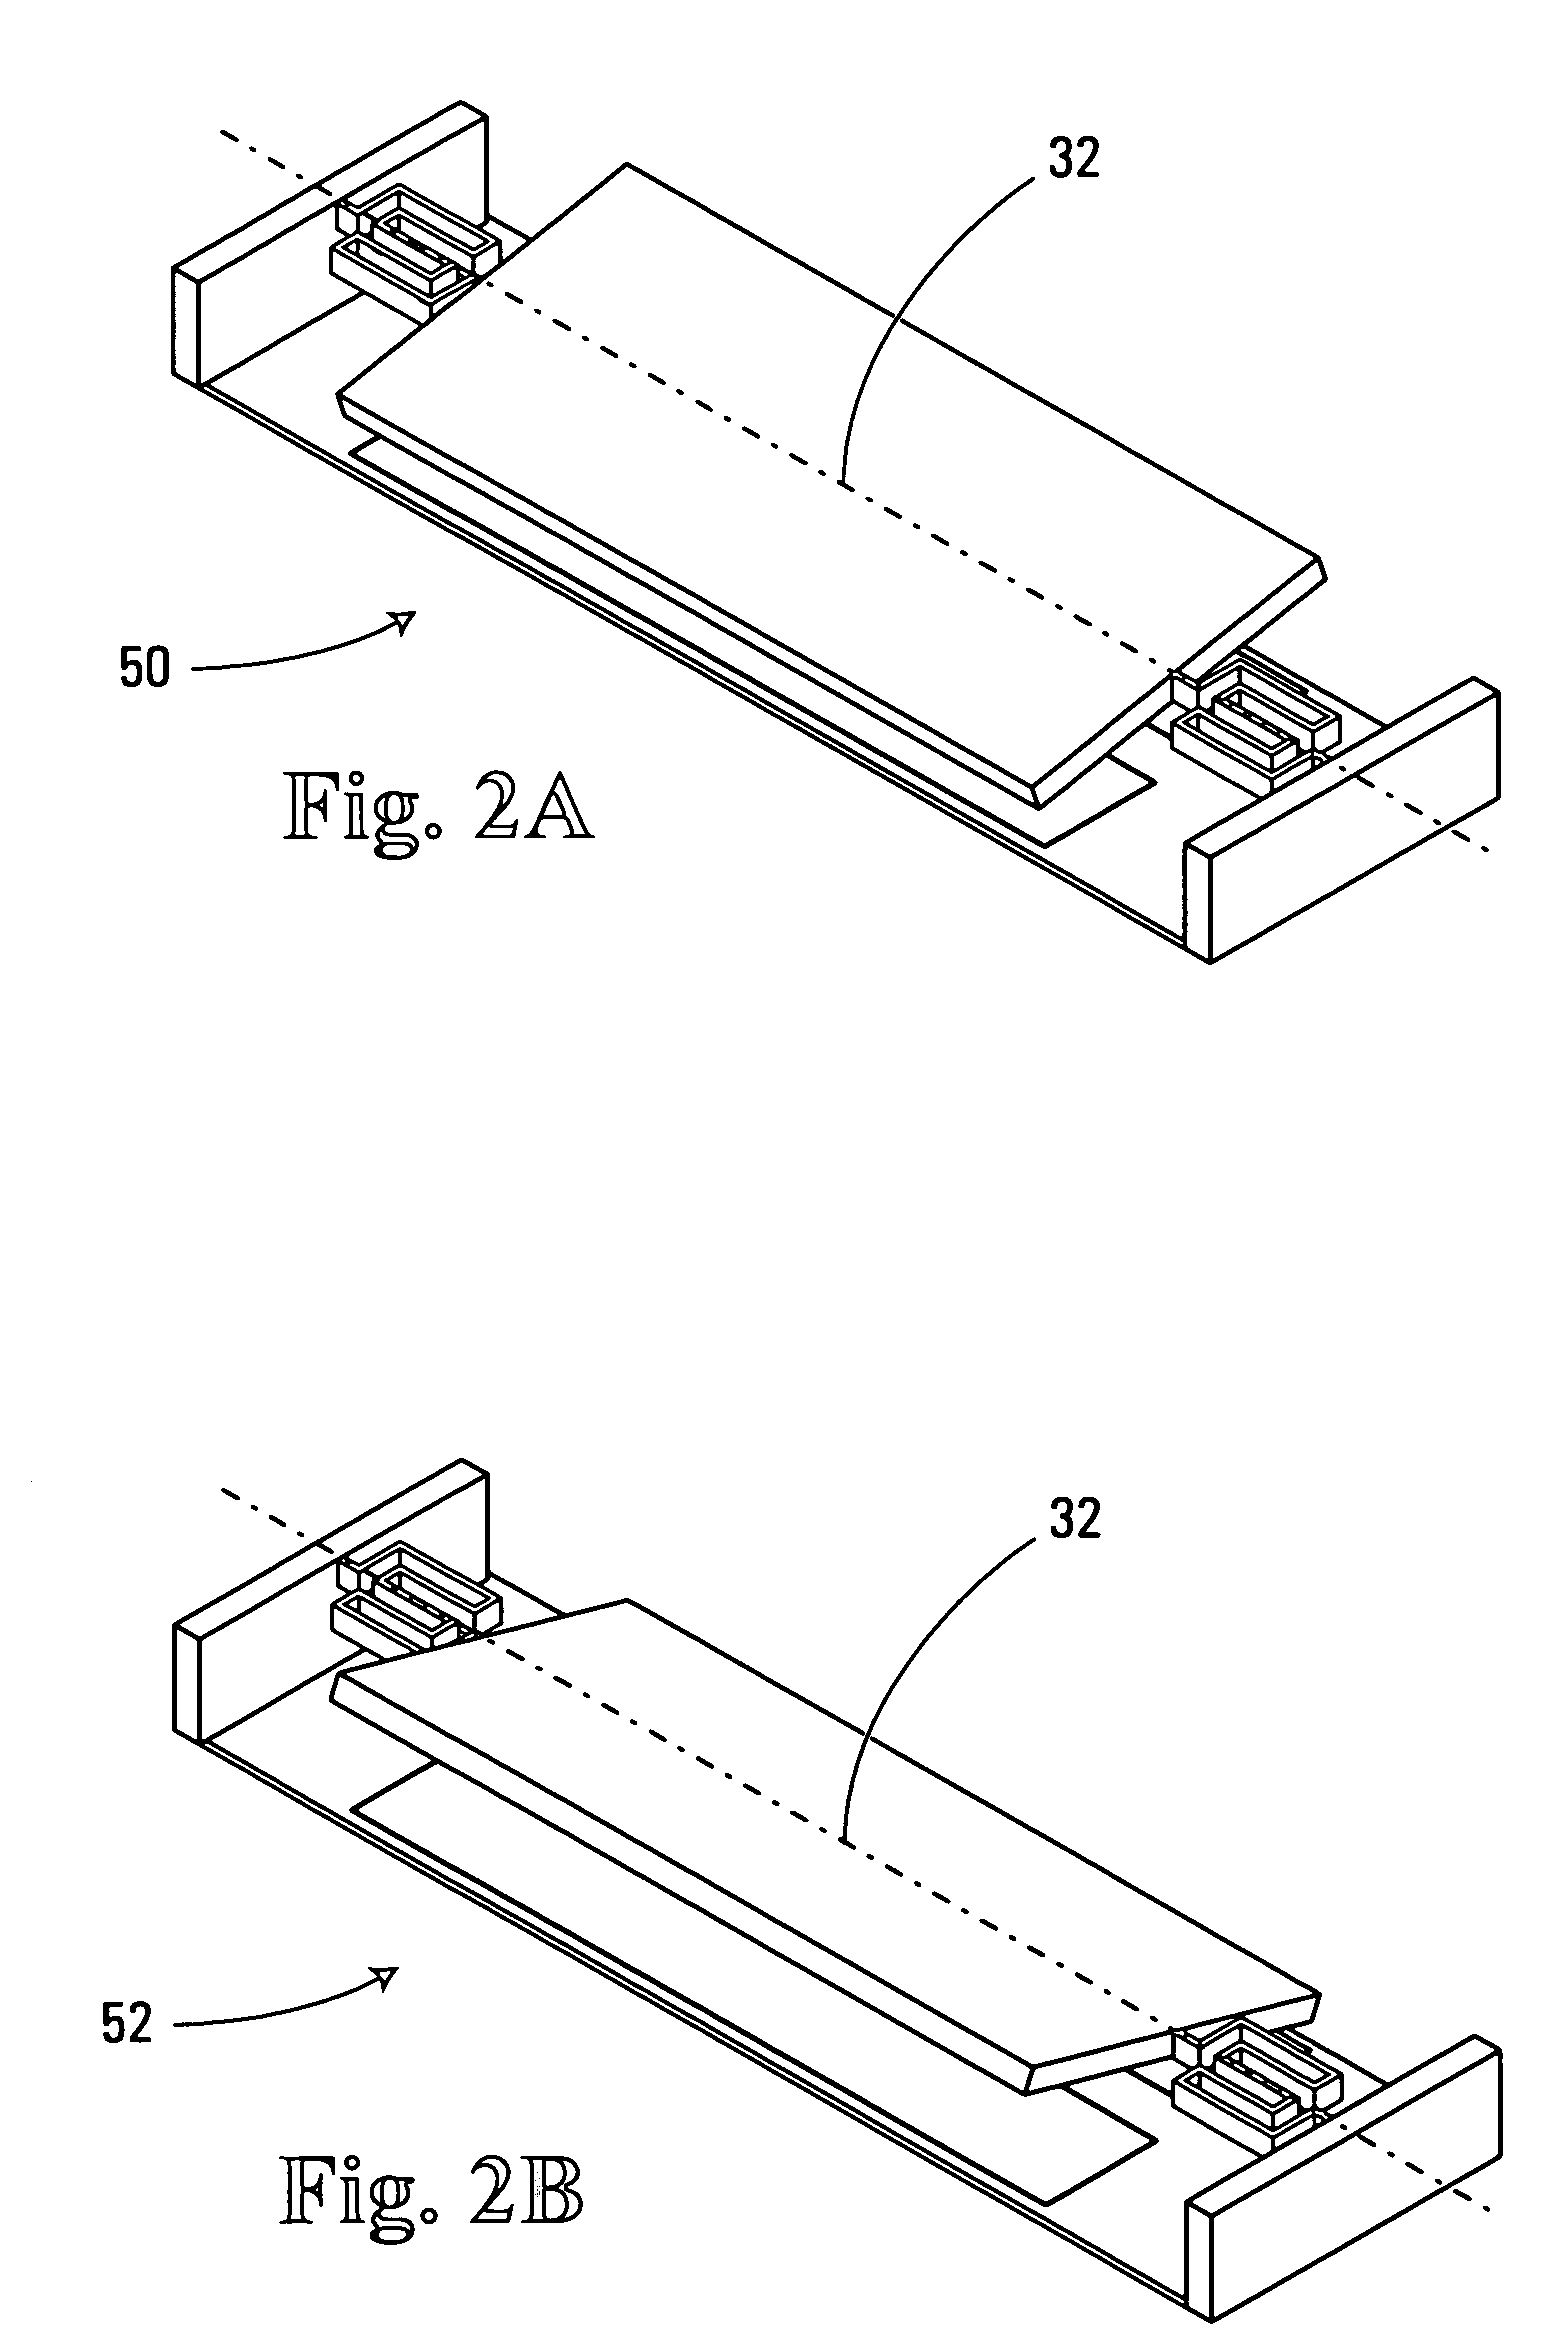 Micro-electro-mechanical-system two dimensional mirror with articulated suspension structures for high fill factor arrays